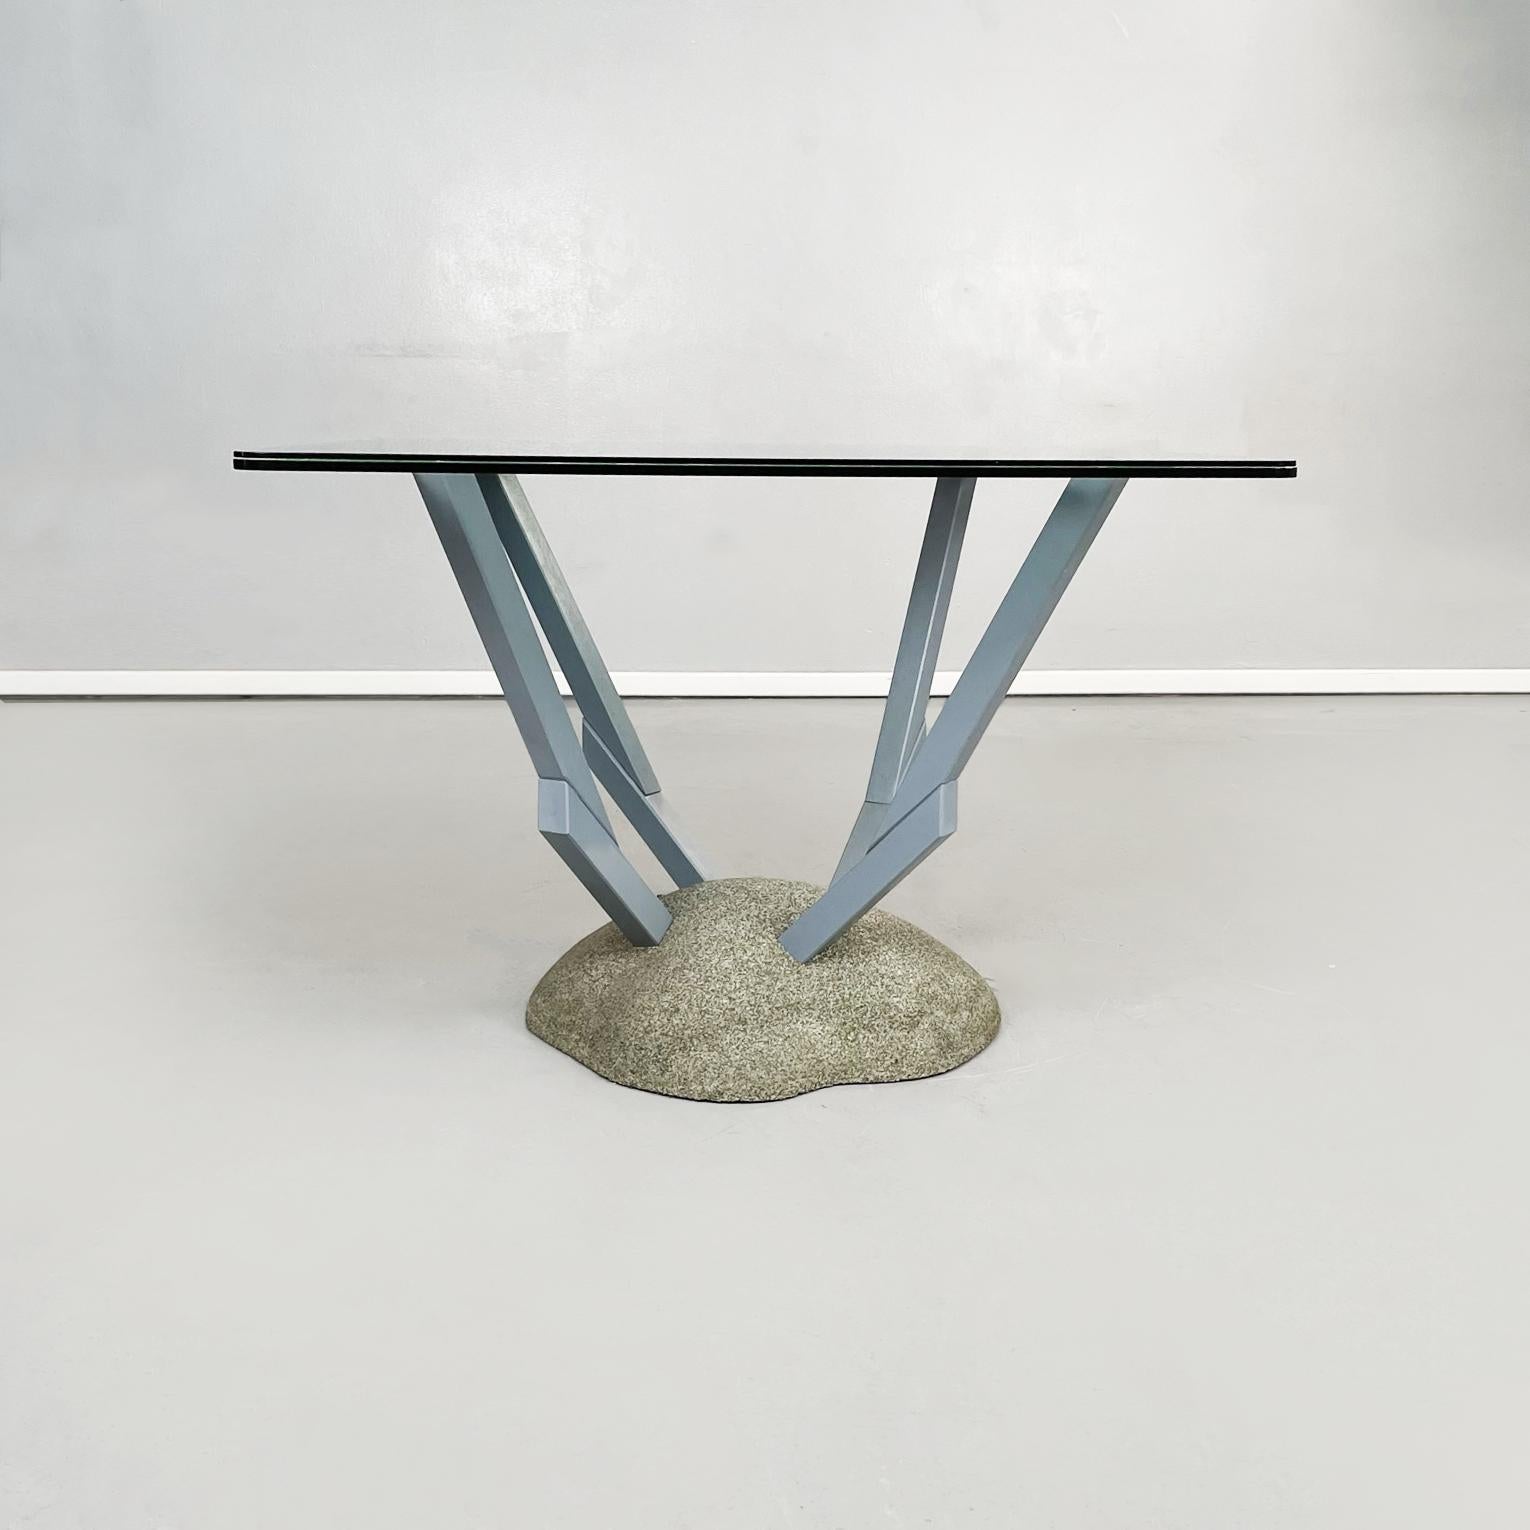 Italian Modern Glass Fabric Wood Table Artifici by Deganello for Cassina, 1985 In Good Condition For Sale In MIlano, IT